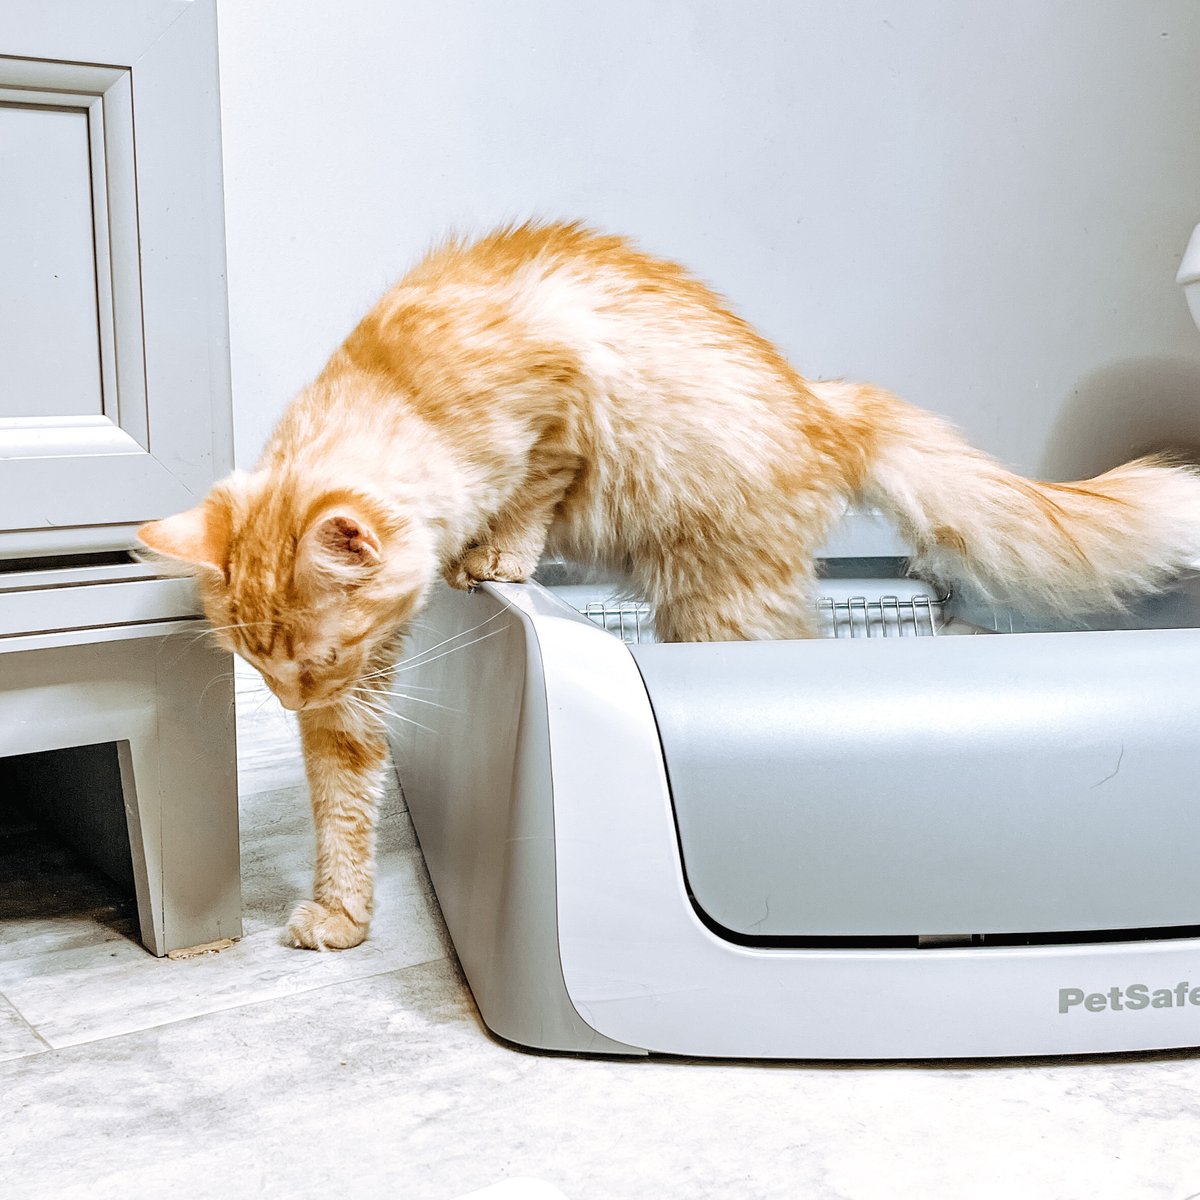 🐾GIVEAWAY 🐾 Want to win the ScoopFree Self-Cleaning Litter Box? 🐈 To enter: retweet, comment and follow @PetSafeUK #Giveaway #Competiton